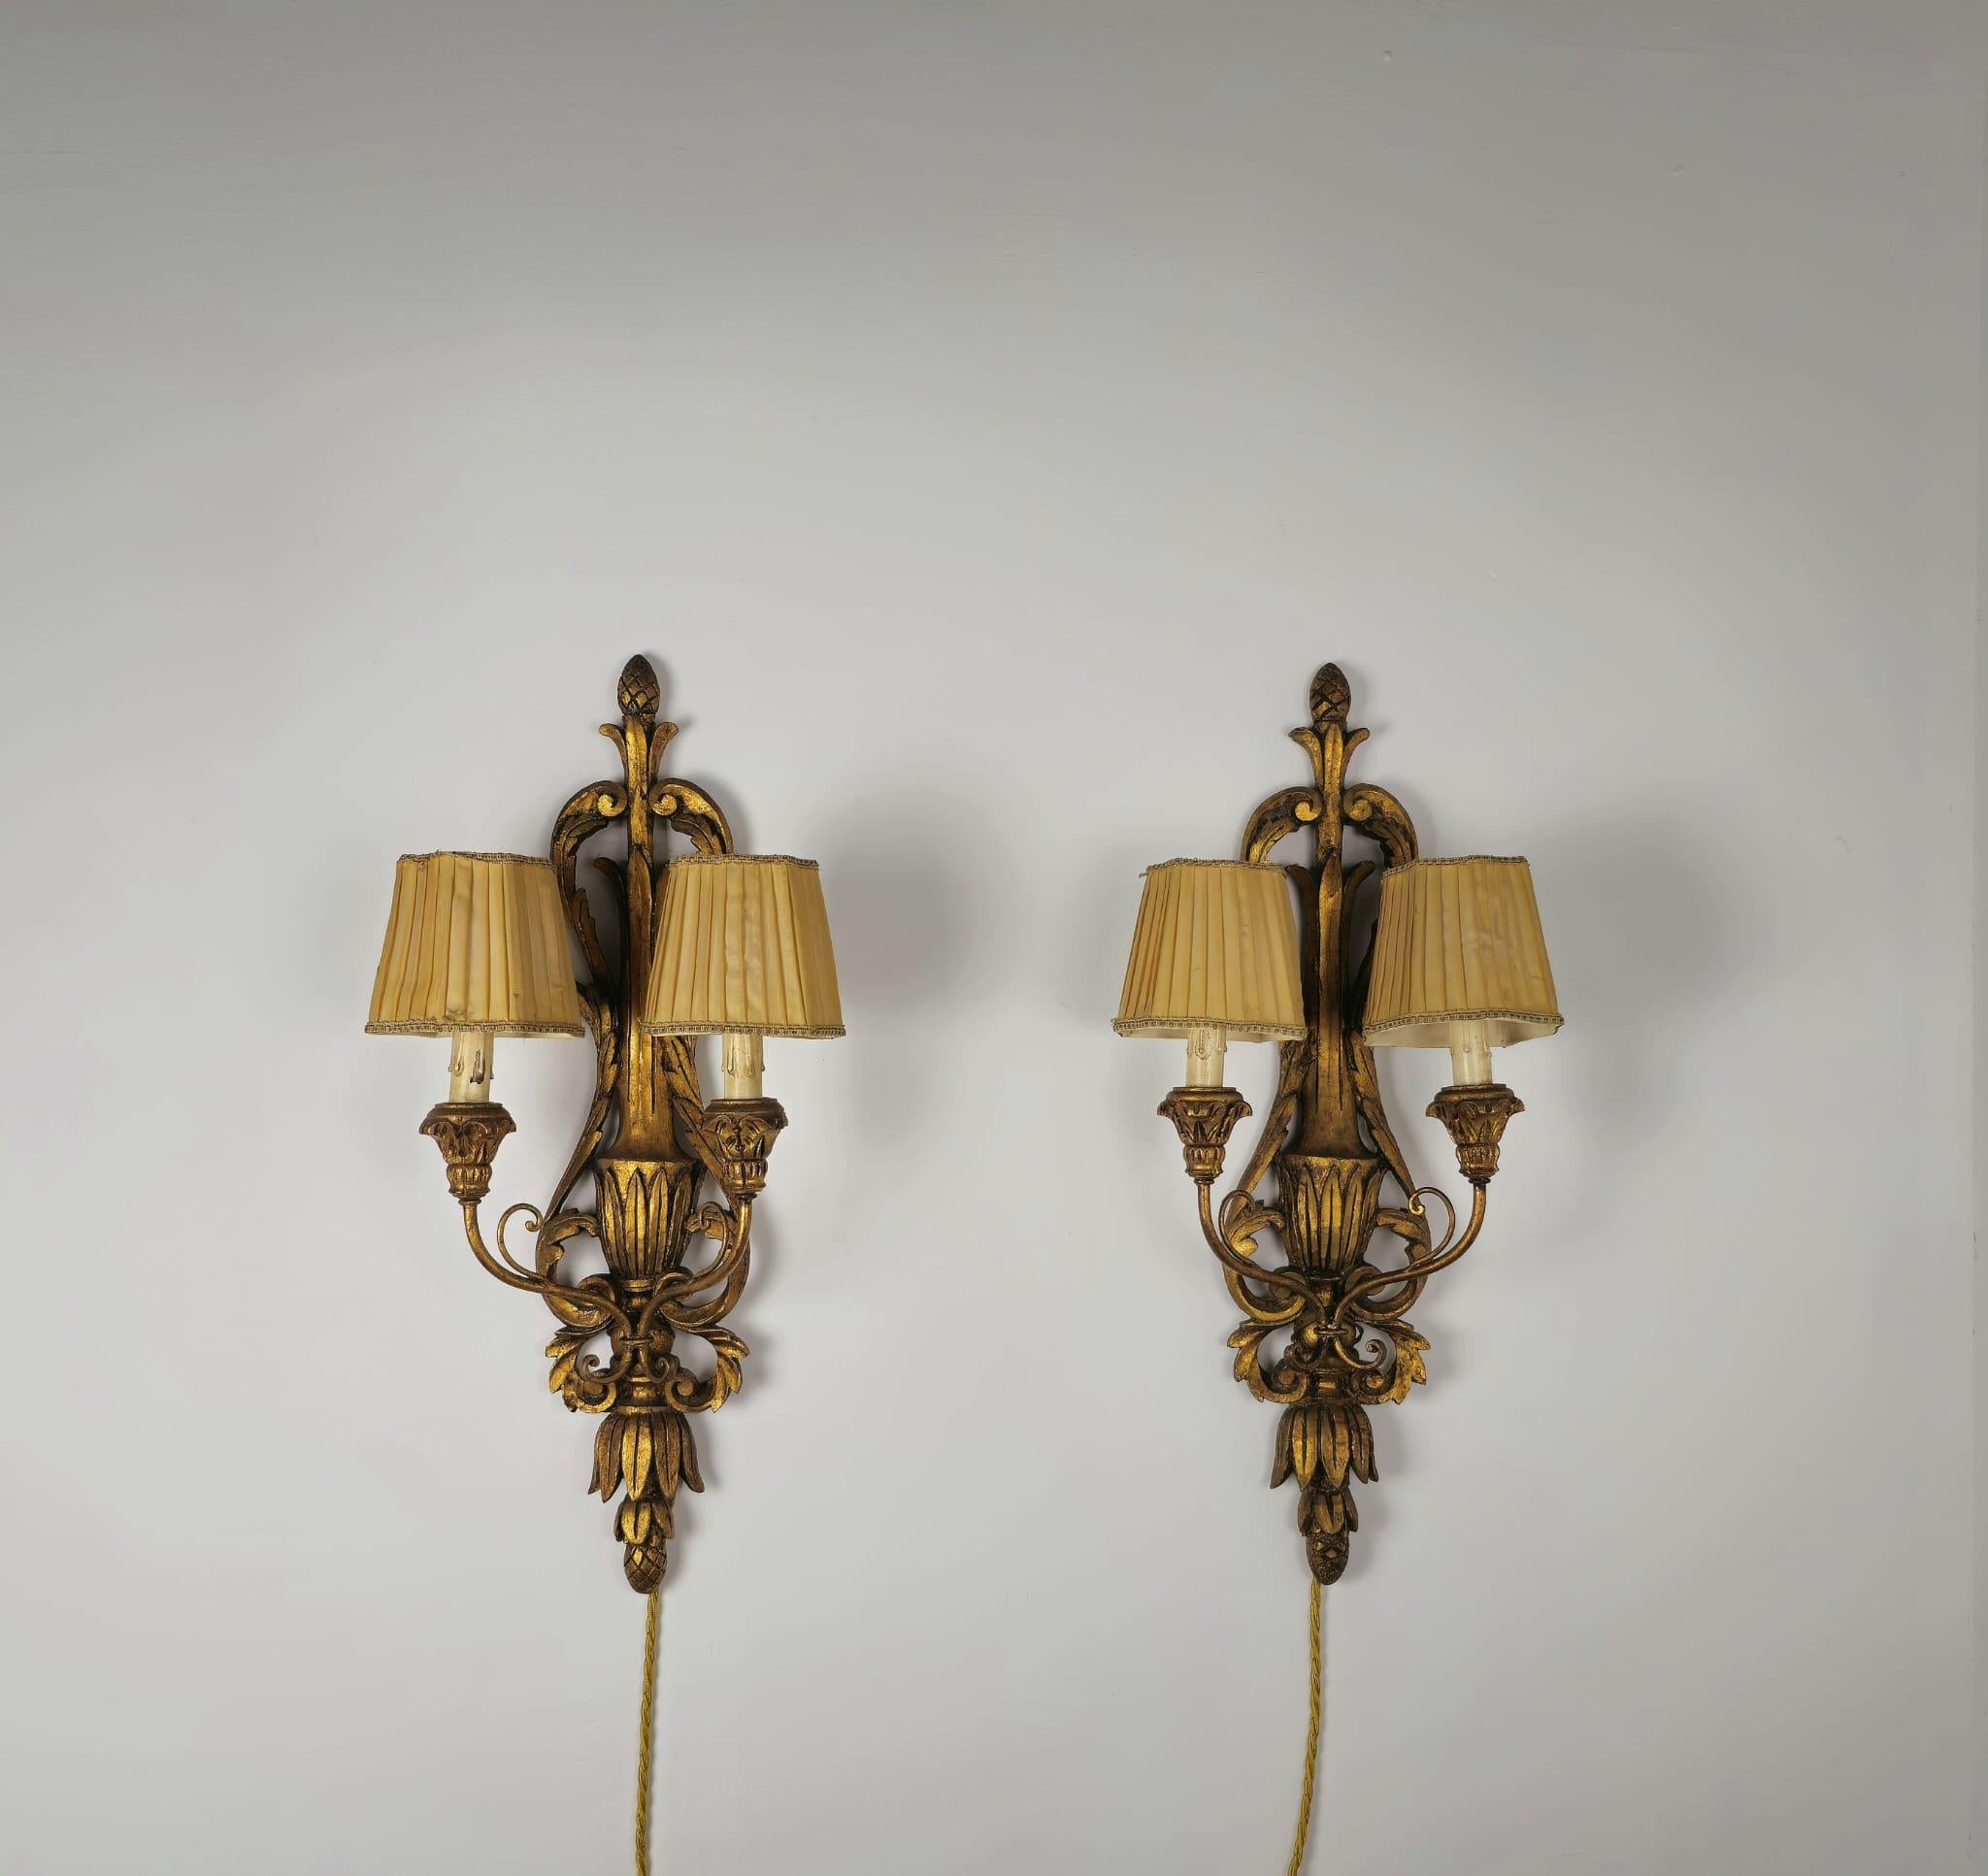 Set of 2 Mid-Century Wall Lamps in Carved Wood and Beige Silk, Italy, 1950s
Each individual wall lamp was made of carved wood with two silk diffusers in the shade of beige.

The two wall lamps have no breaks or tears. Perfectly working.

Weight of 1